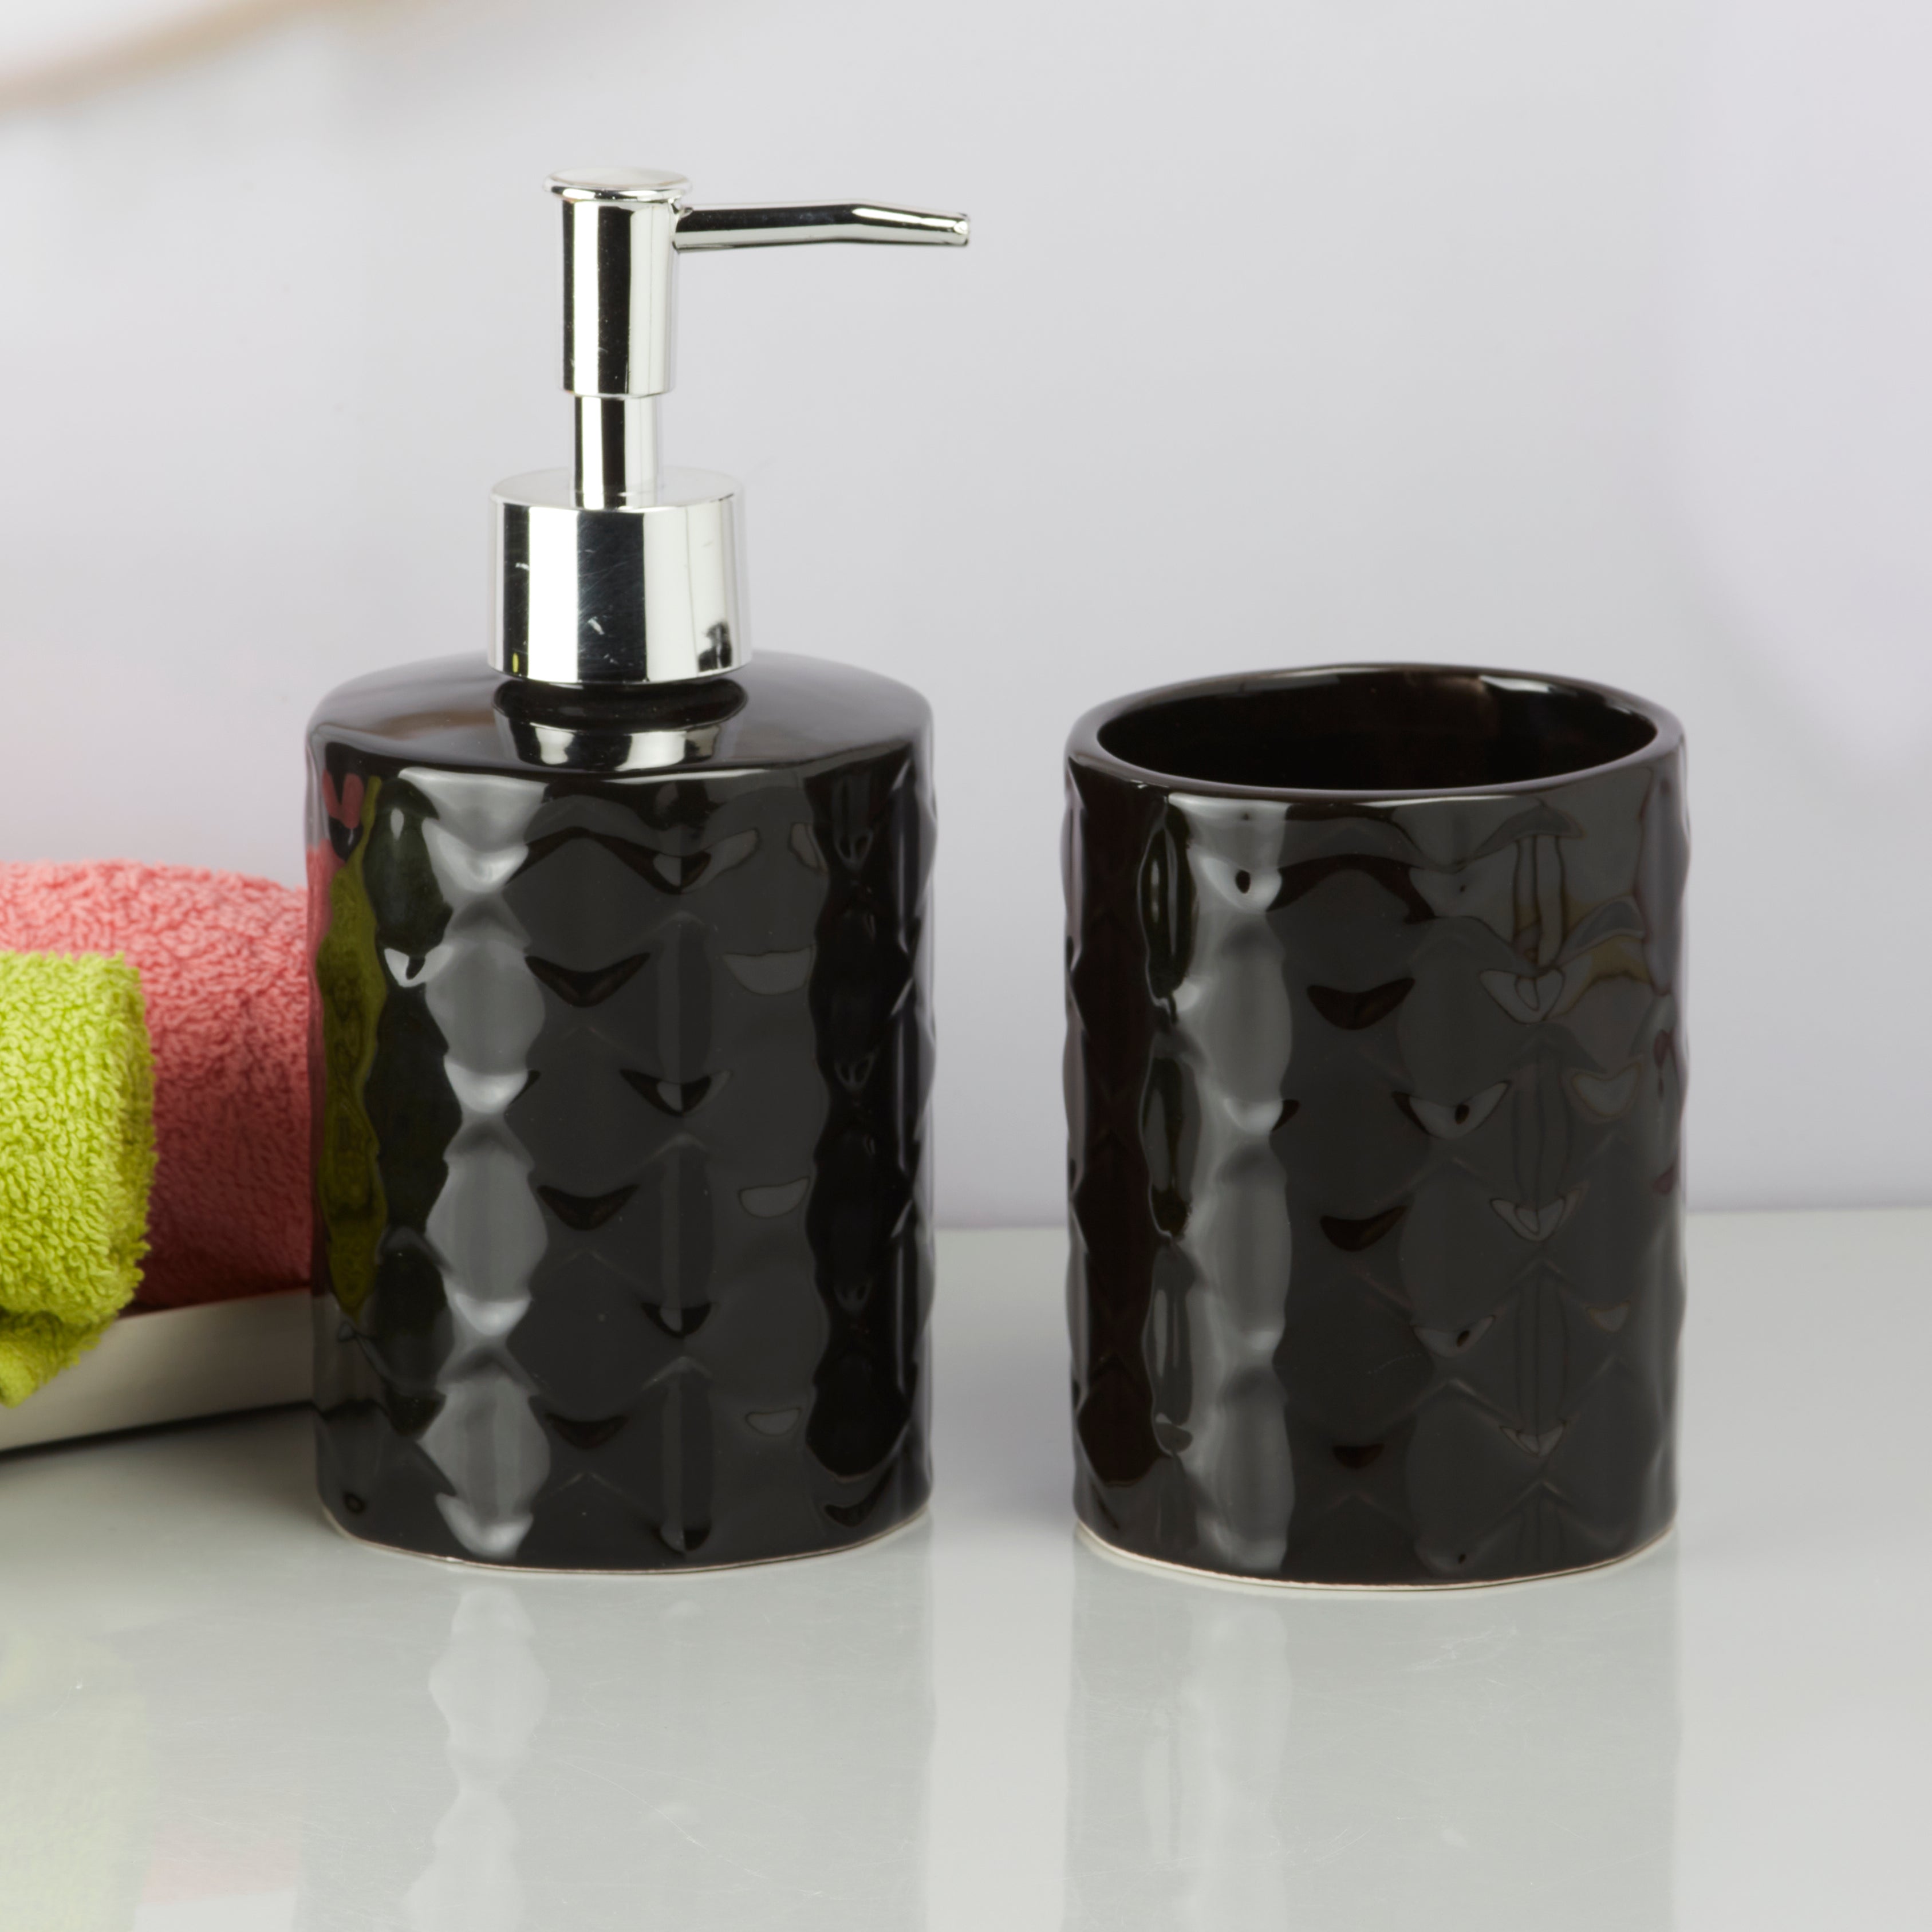 Kookee Ceramic Bathroom Accessories Set of 2, Modern Bath Set with Liquid handwash Soap Dispenser and Toothbrush holder, Luxury Gift Accessory for Home, Black (9721)